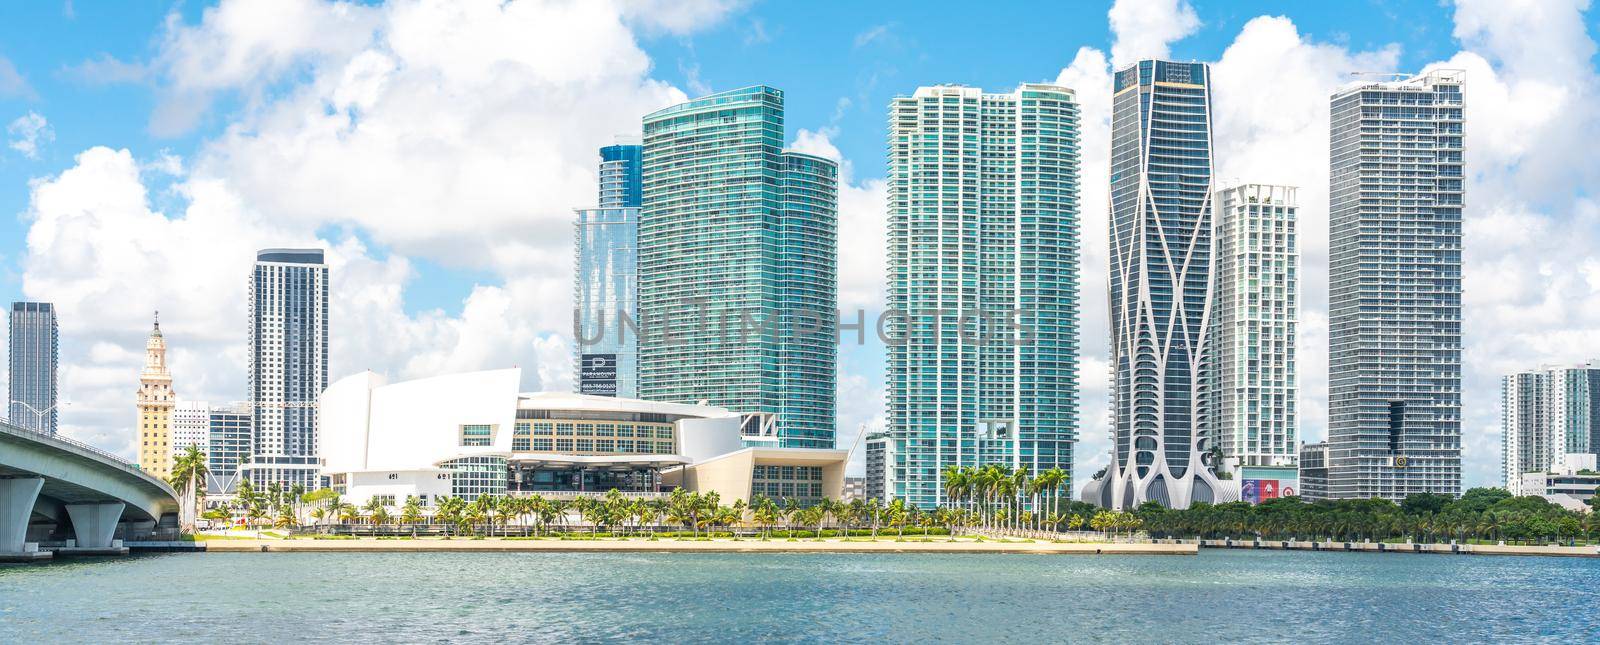 Miami, USA - September 11, 2019: Skyline of Miami with American Airlines arena by Mariakray